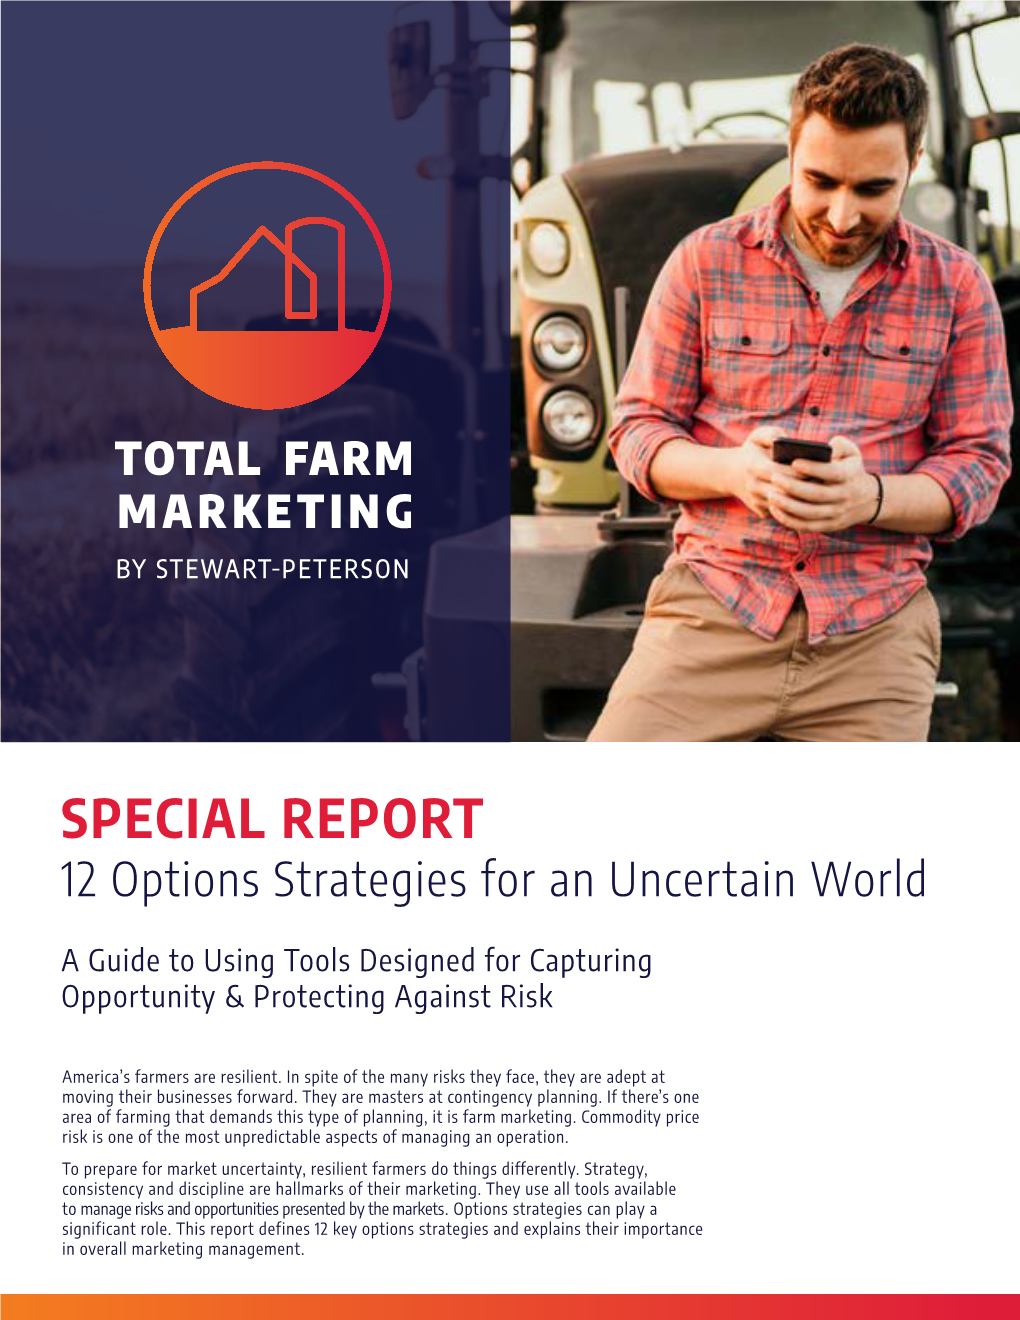 SPECIAL REPORT 12 Options Strategies for an Uncertain World